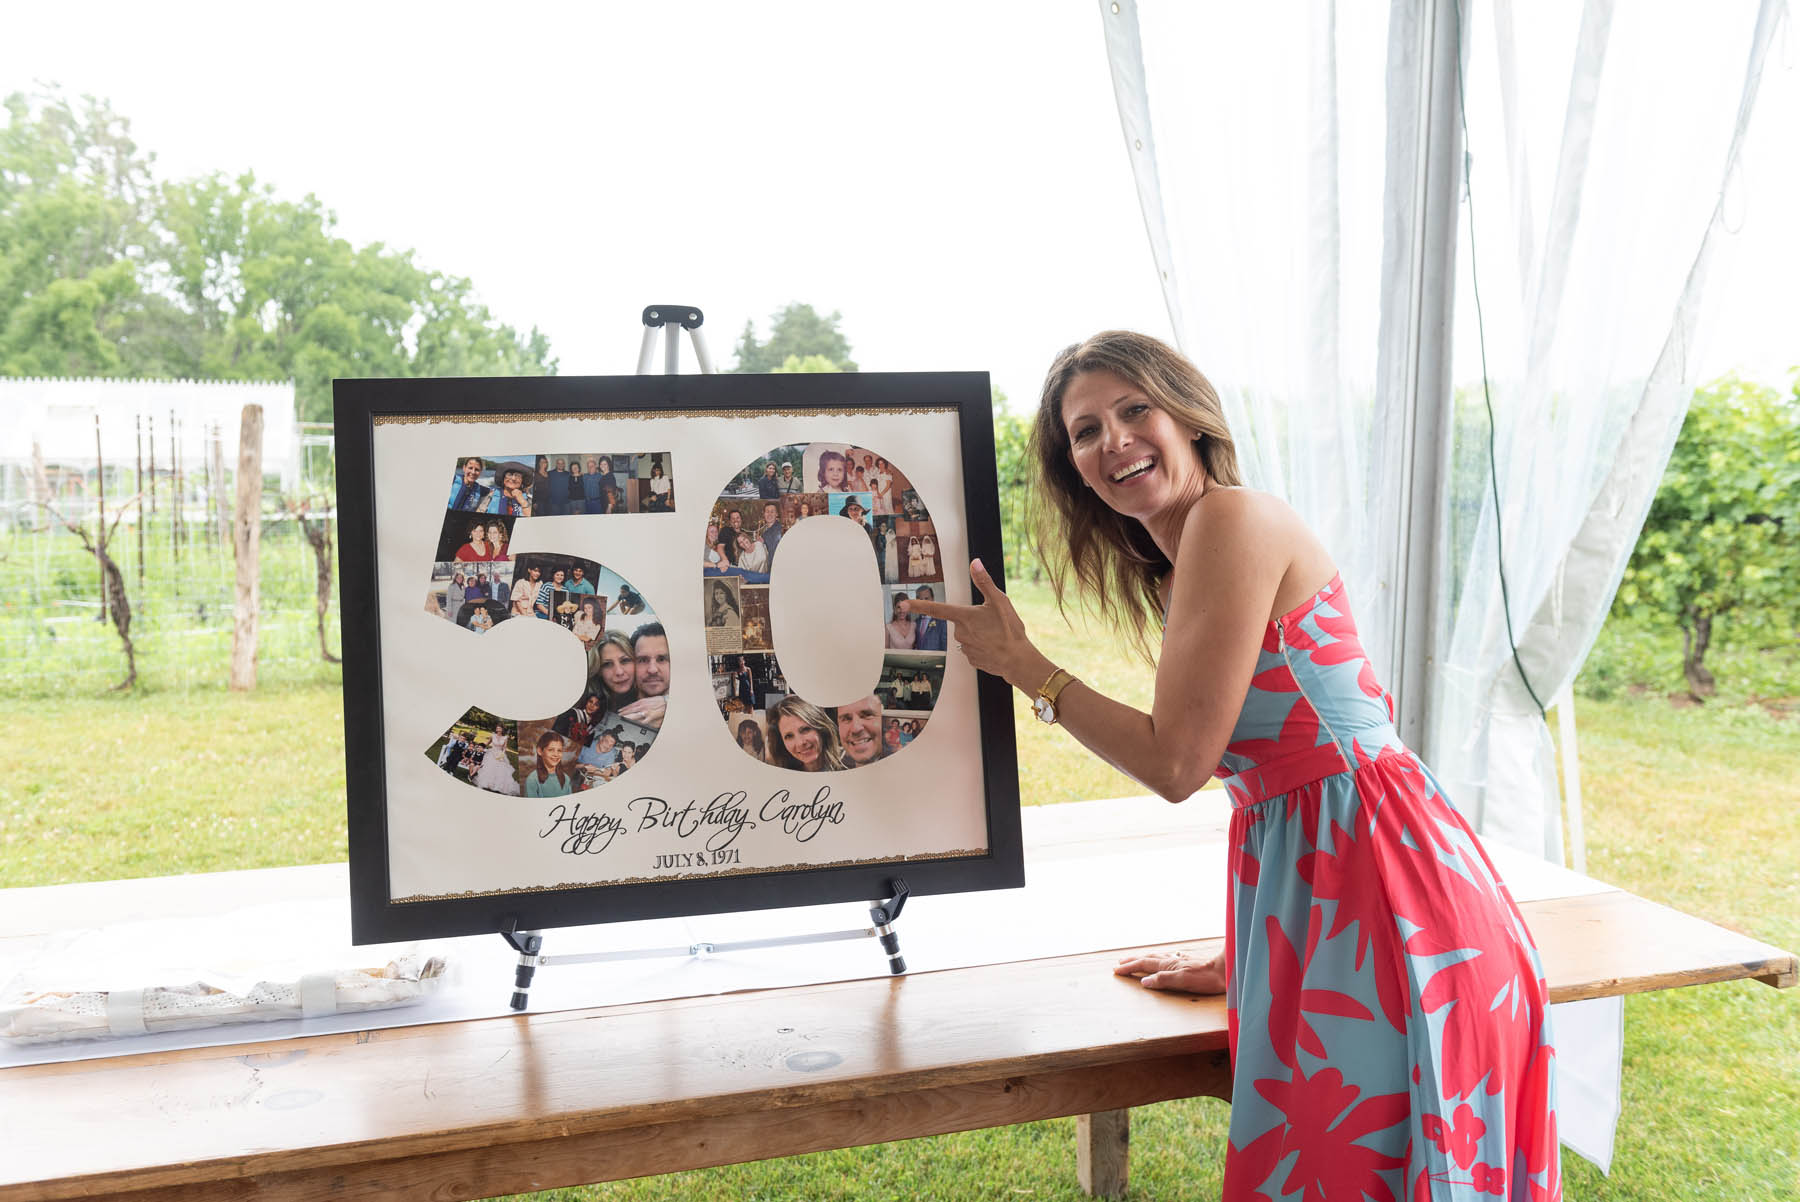 Event Photography Excellence by a Professional Photographer - Carolyn 50th Birthday